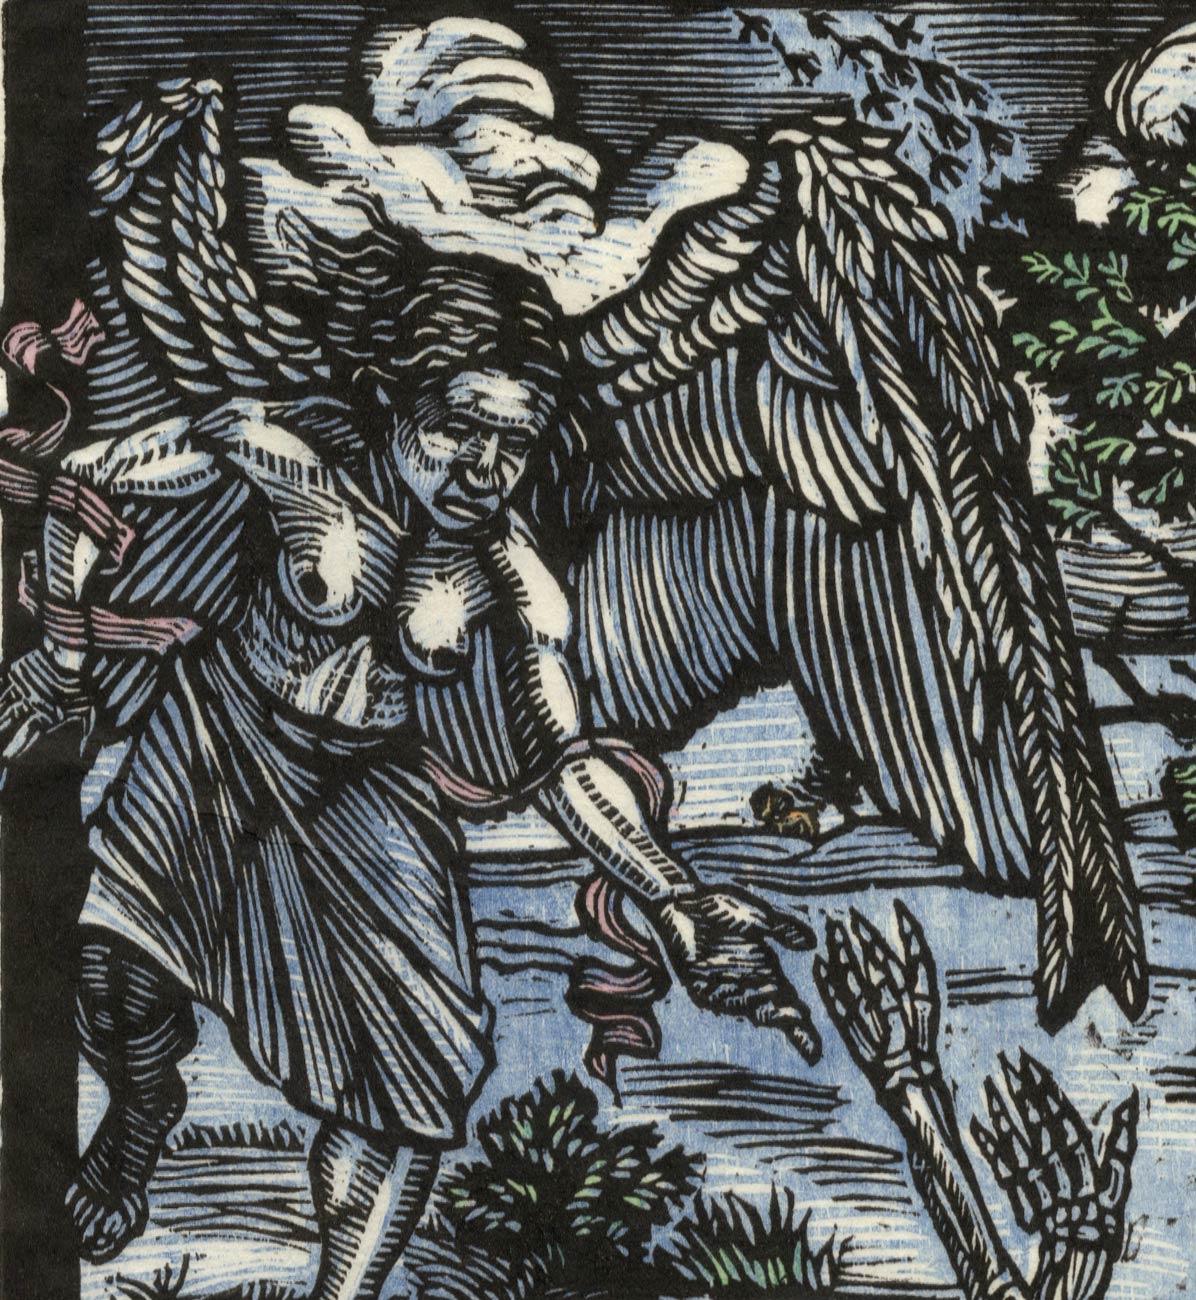 Angel and Skeleton (the rescuing Angel appears to be female) - Print by Donna Evans